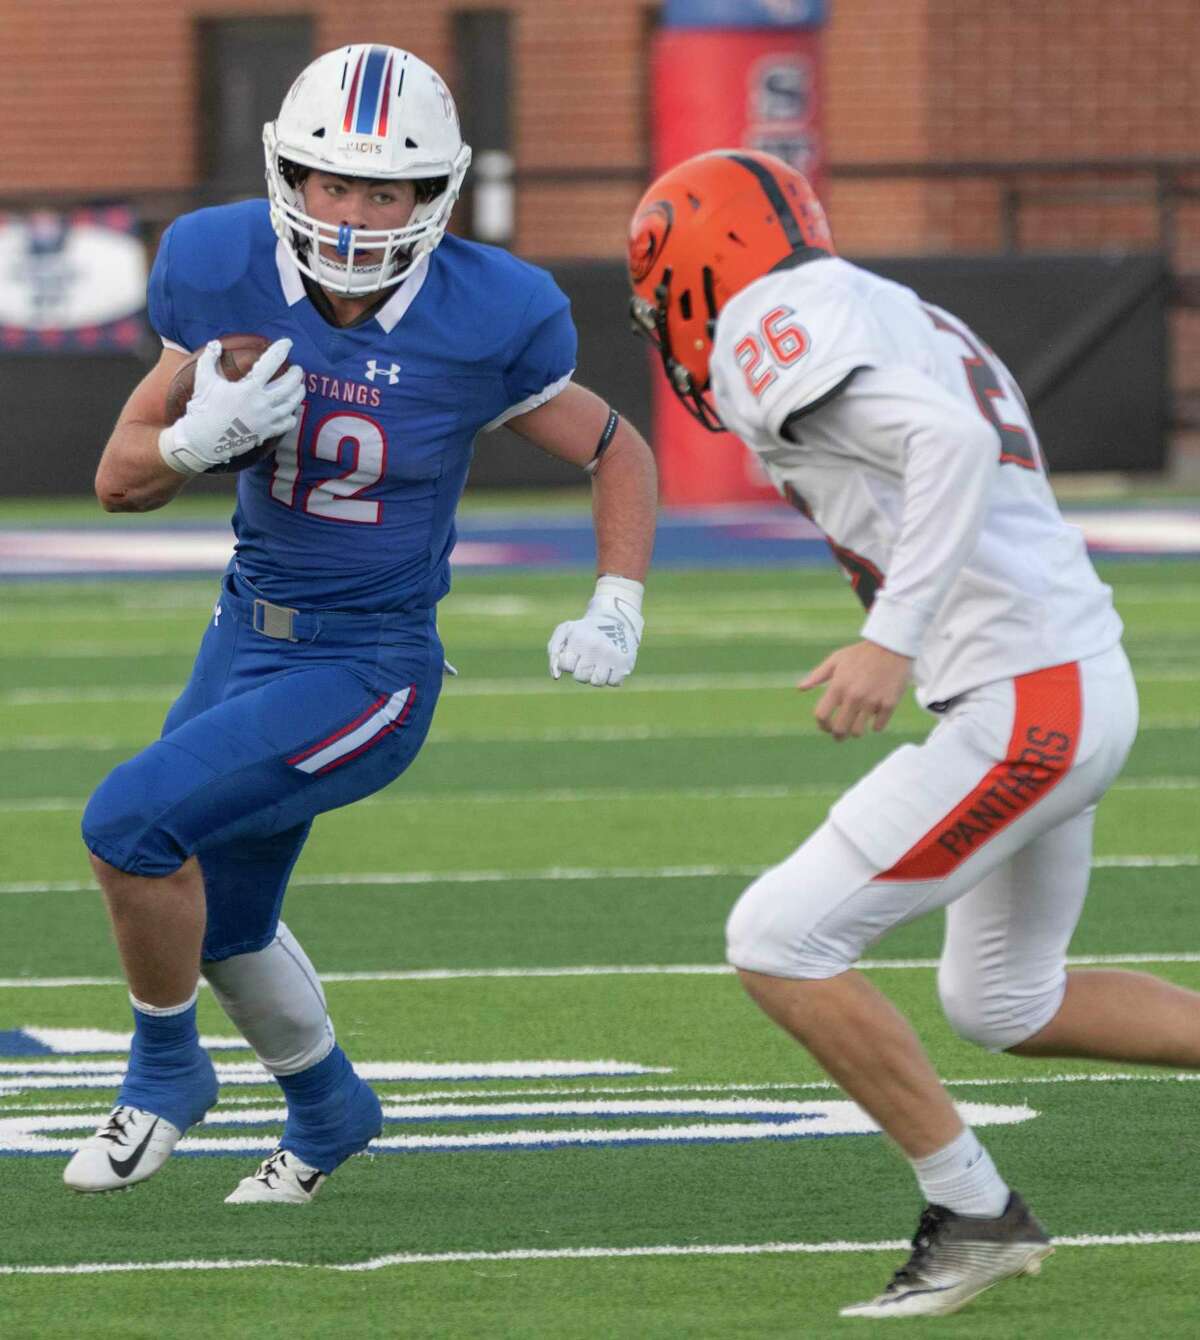 Midland Christian’s Rhett Clark looks to get past St. Pius’ Hayden Payne during last year’s playoff game. The Panthers have outscored opponents 138-20 in 2020.